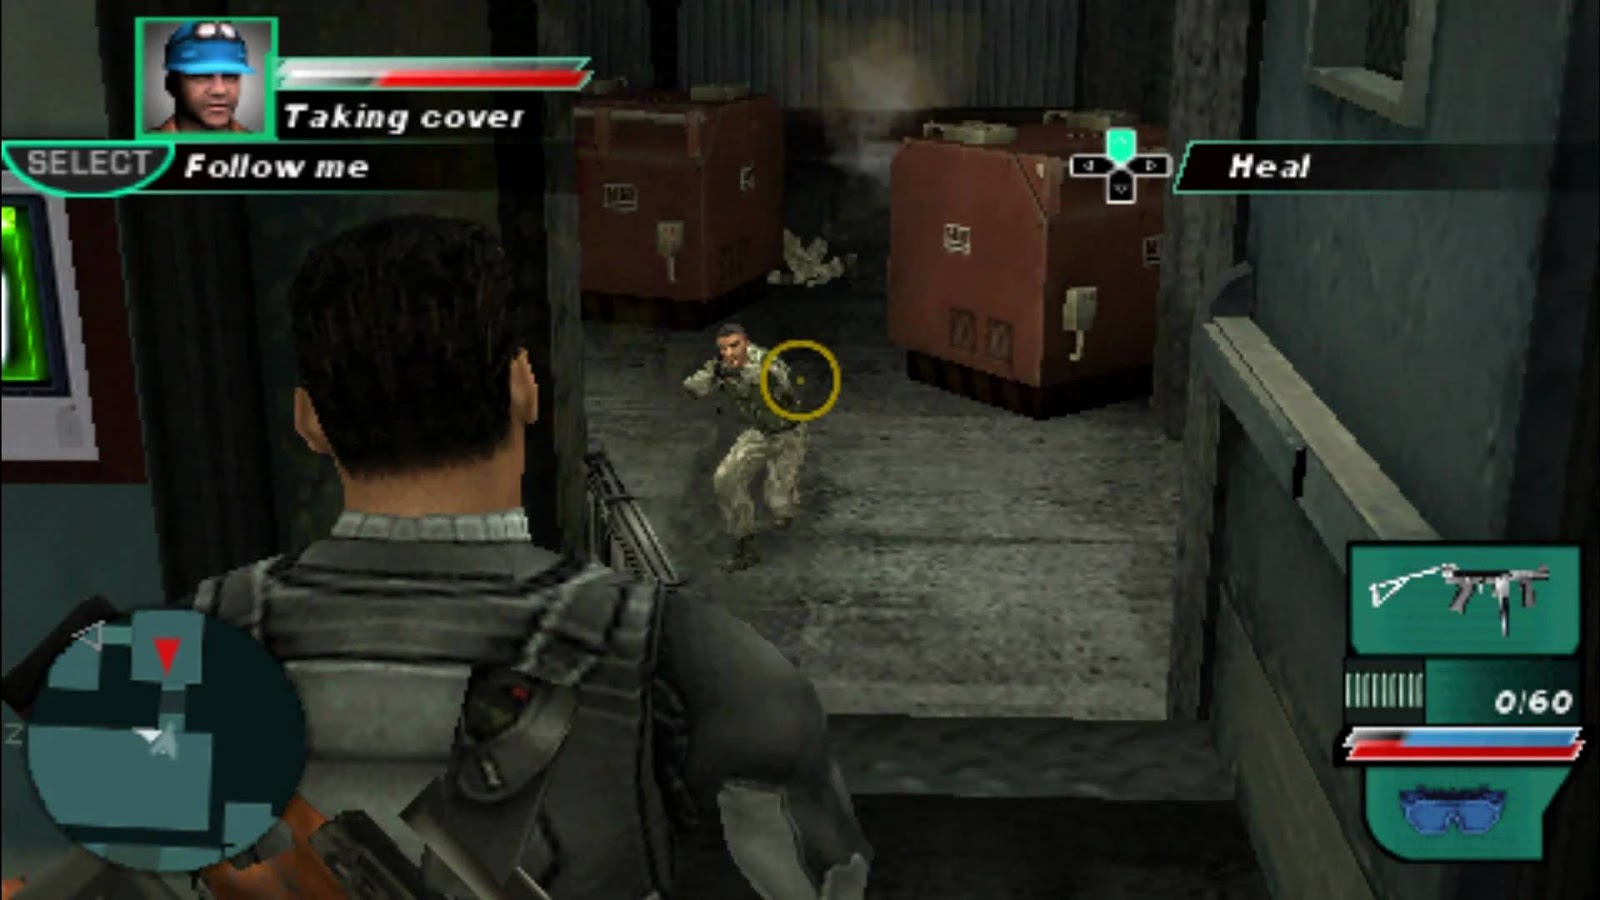 syphon filter pc game download